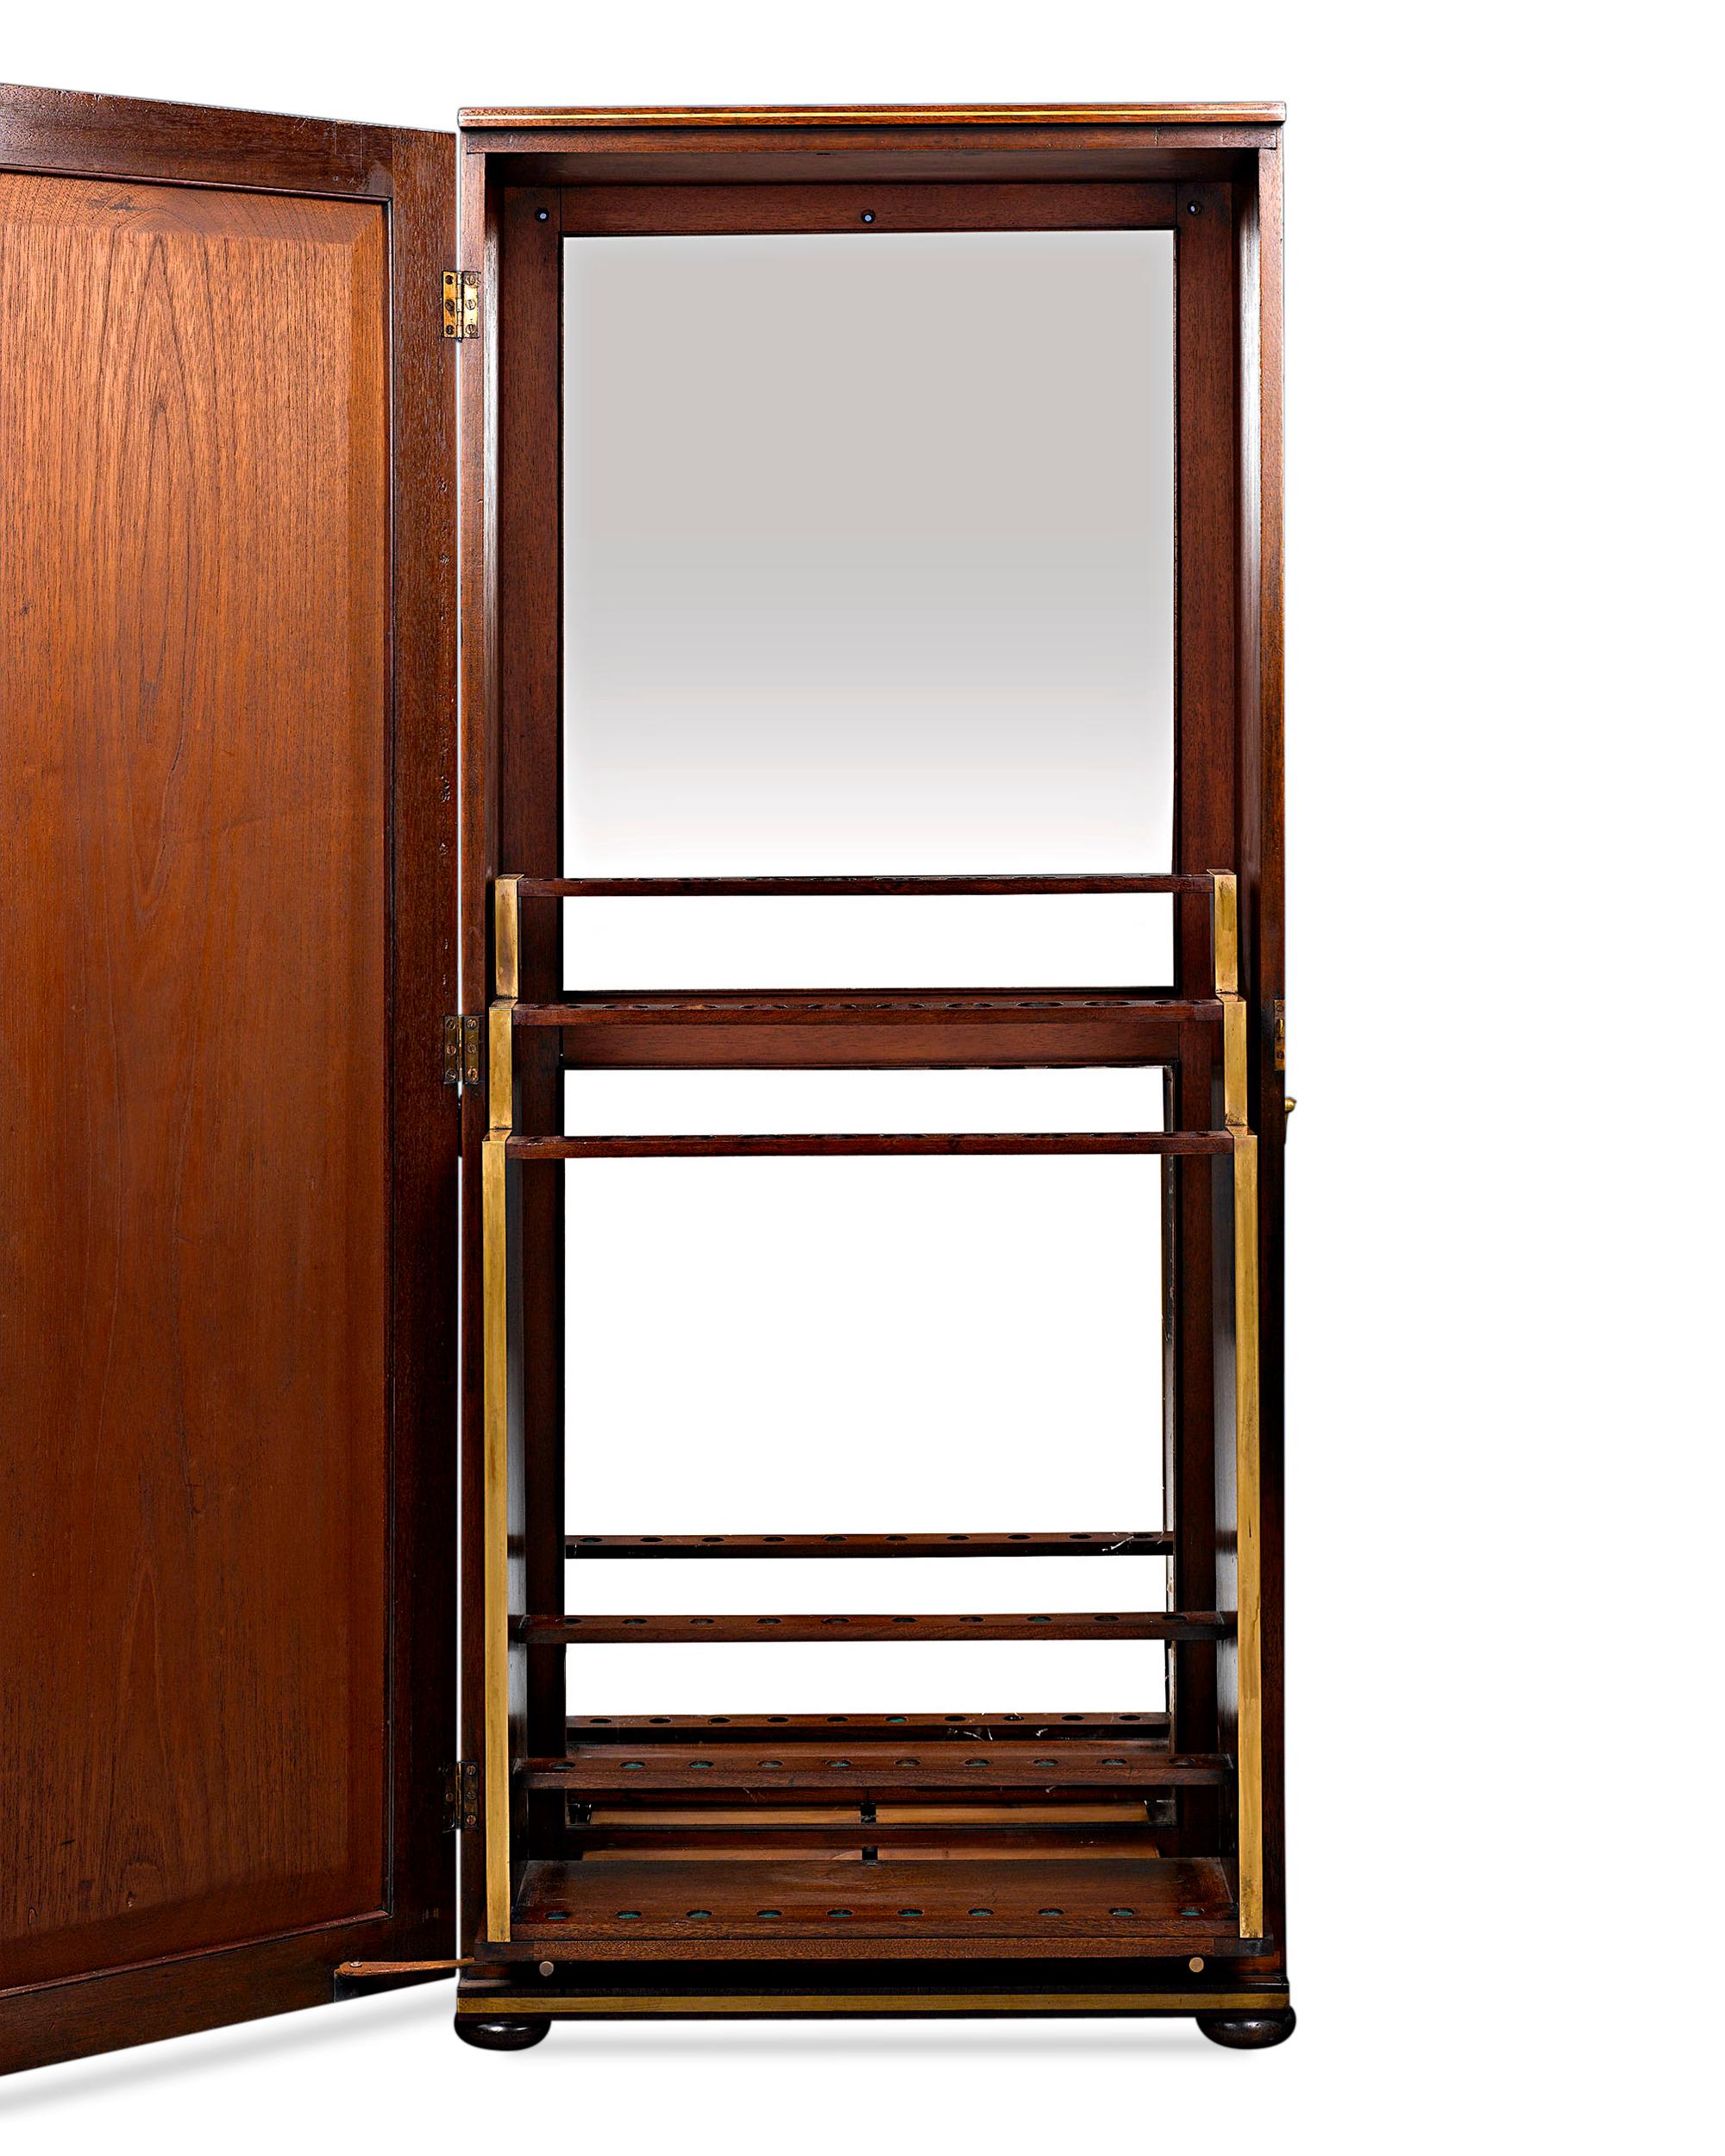 This English cane cabinet exhibits classical style and impeccable design. Crafted of lustrous Cuban mahogany, this upright case features a beautifully paneled door which opens to reveal a three-tiered cane rack for 30 walking sticks. This ingenious